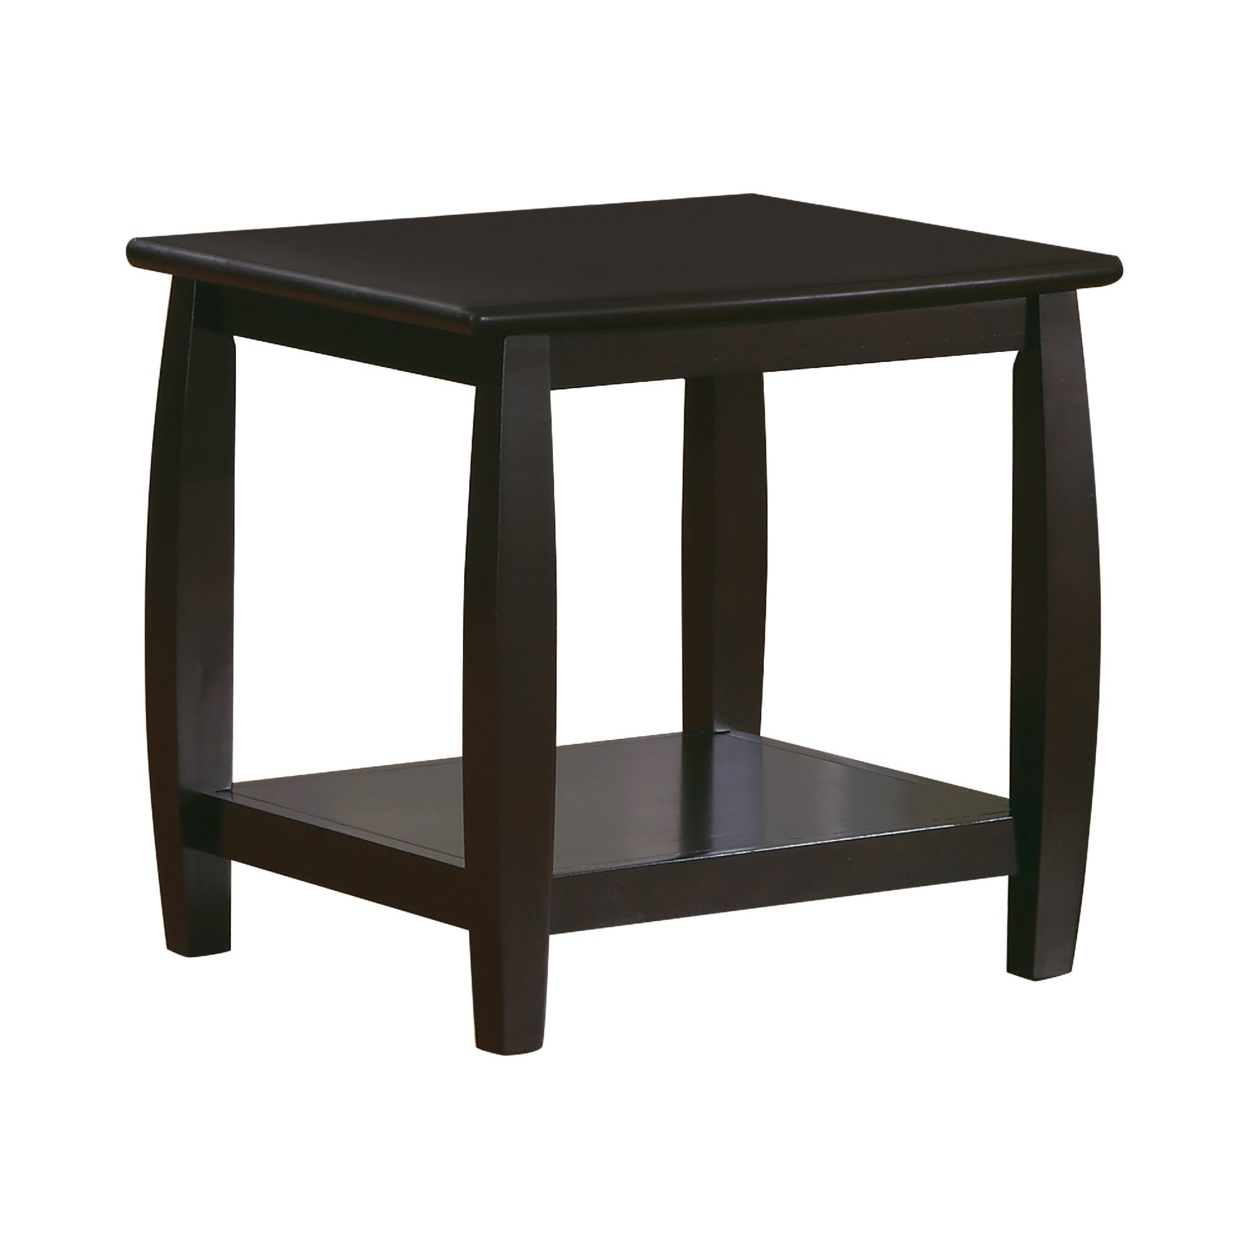 Contemporary Style Solid Wood End Table With Slightly Rounded Shape, Dark Brown- Saltoro Sherpi